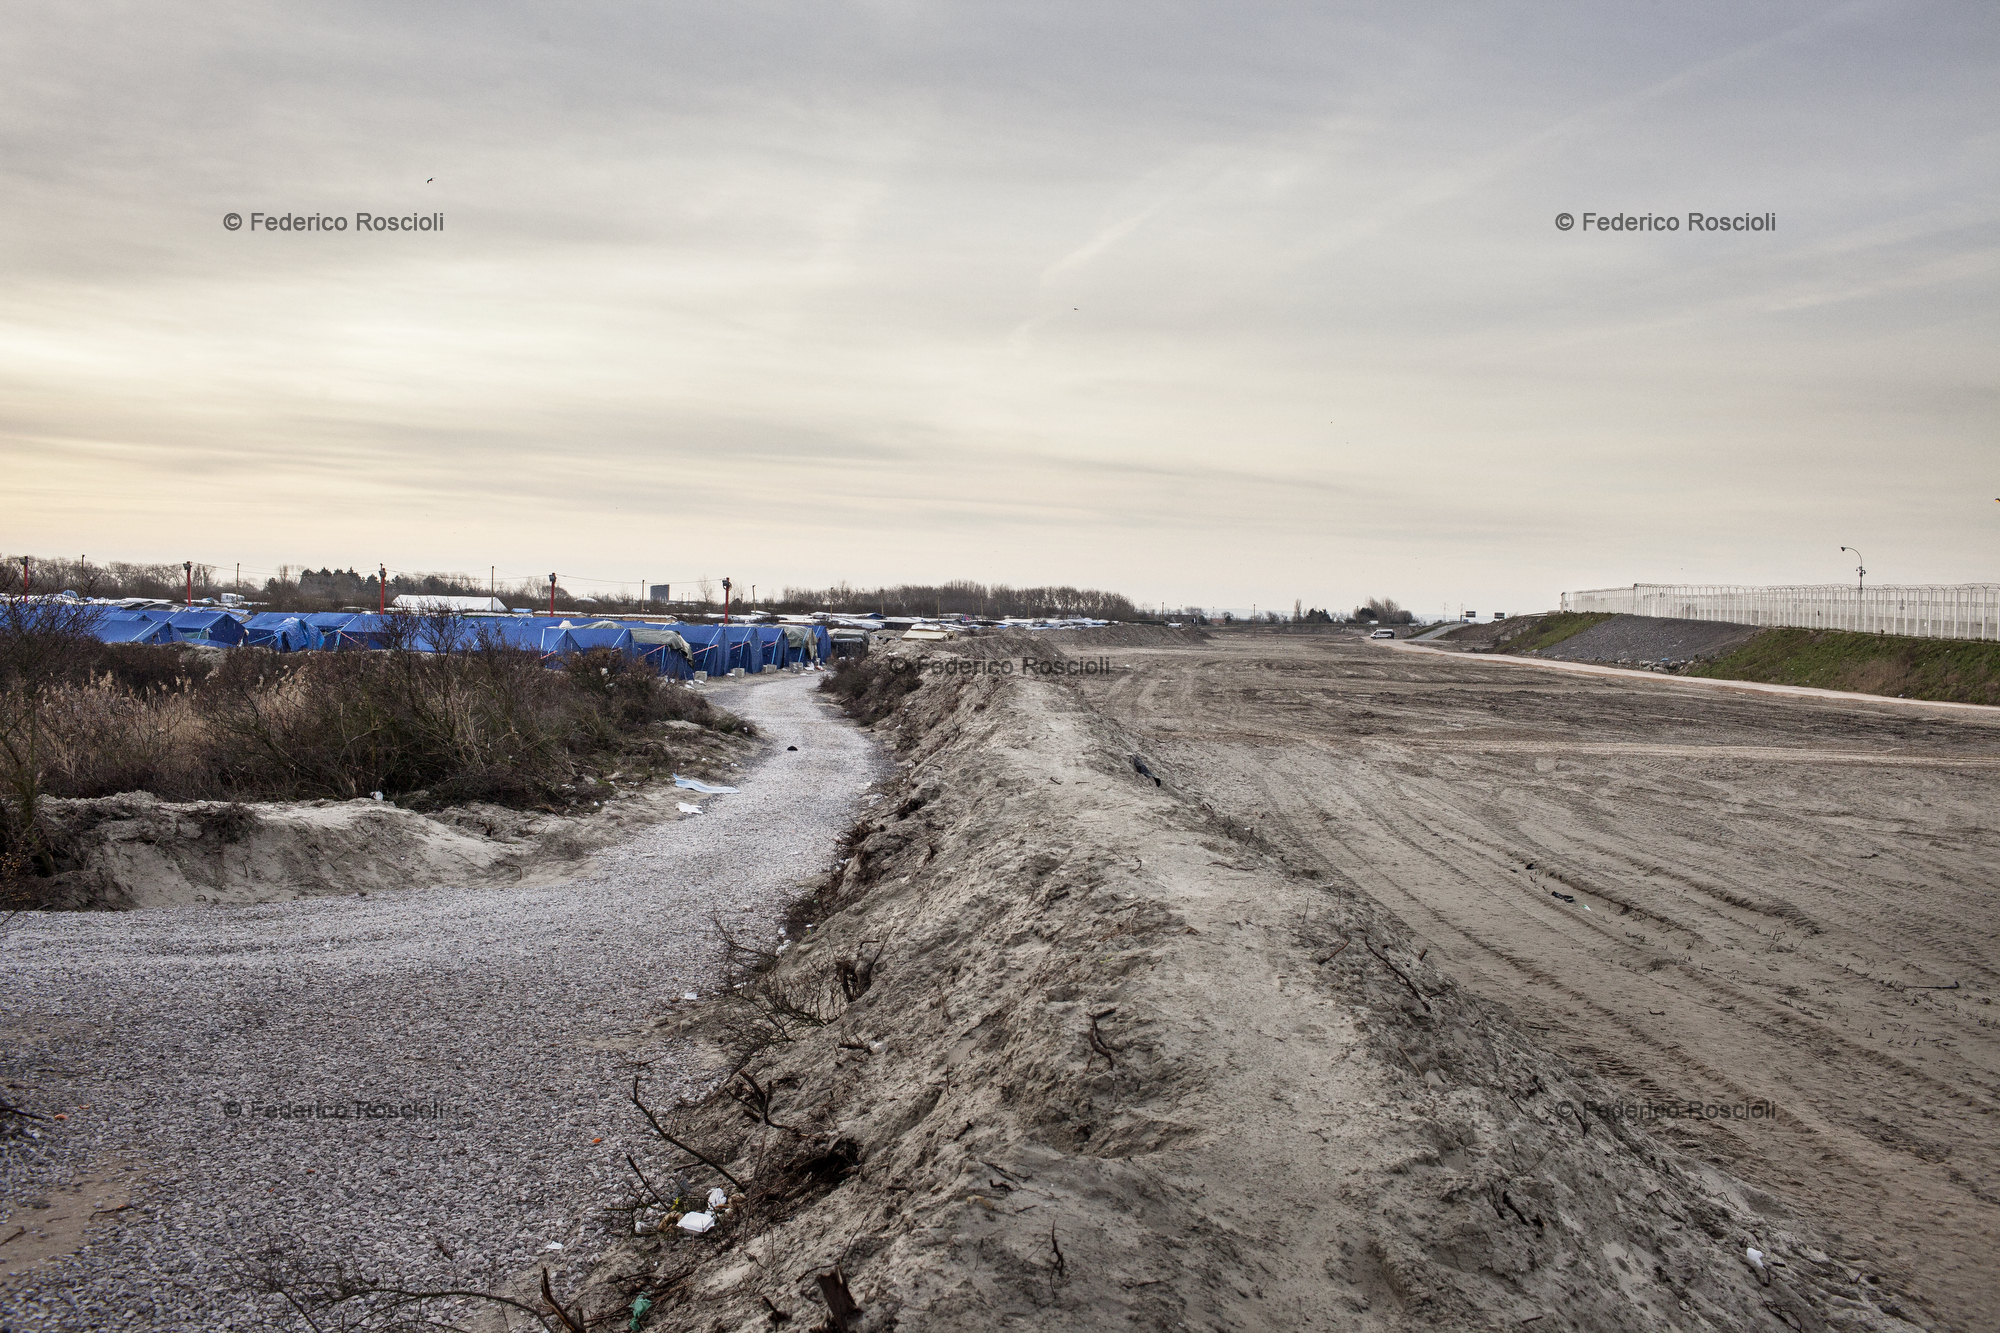 Calais, France. February 28, 2016. View from the wall between the cleared area and the camp. In the last week a part of the camp was destroyed by the French government and the area completely cleared.